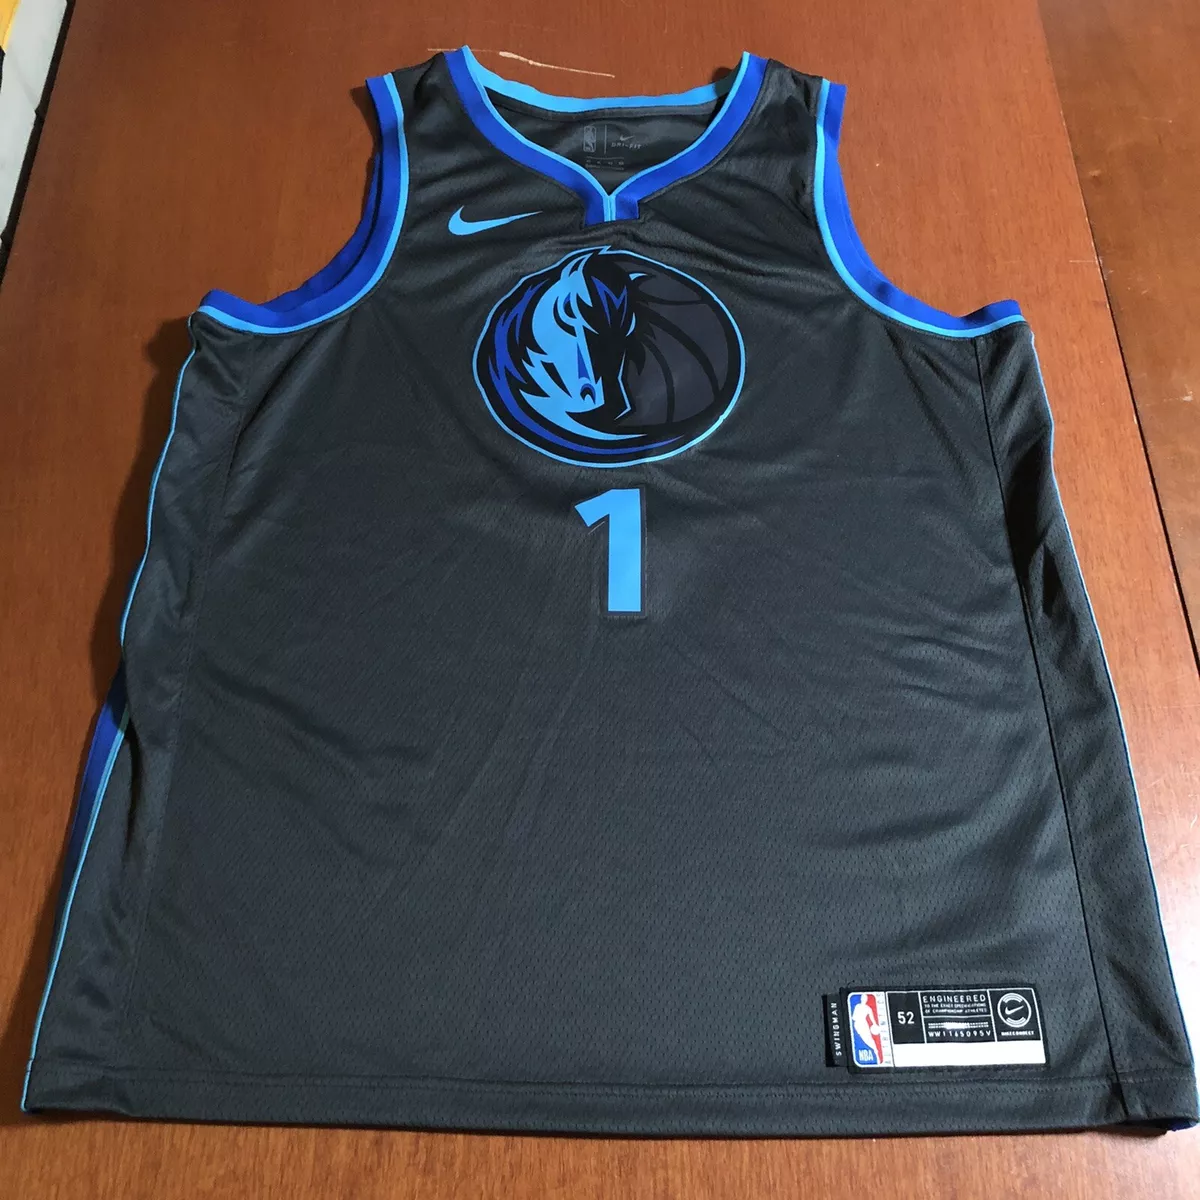 Gallery: Every new Nike 'City Edition' NBA jerseys for the 2018-19